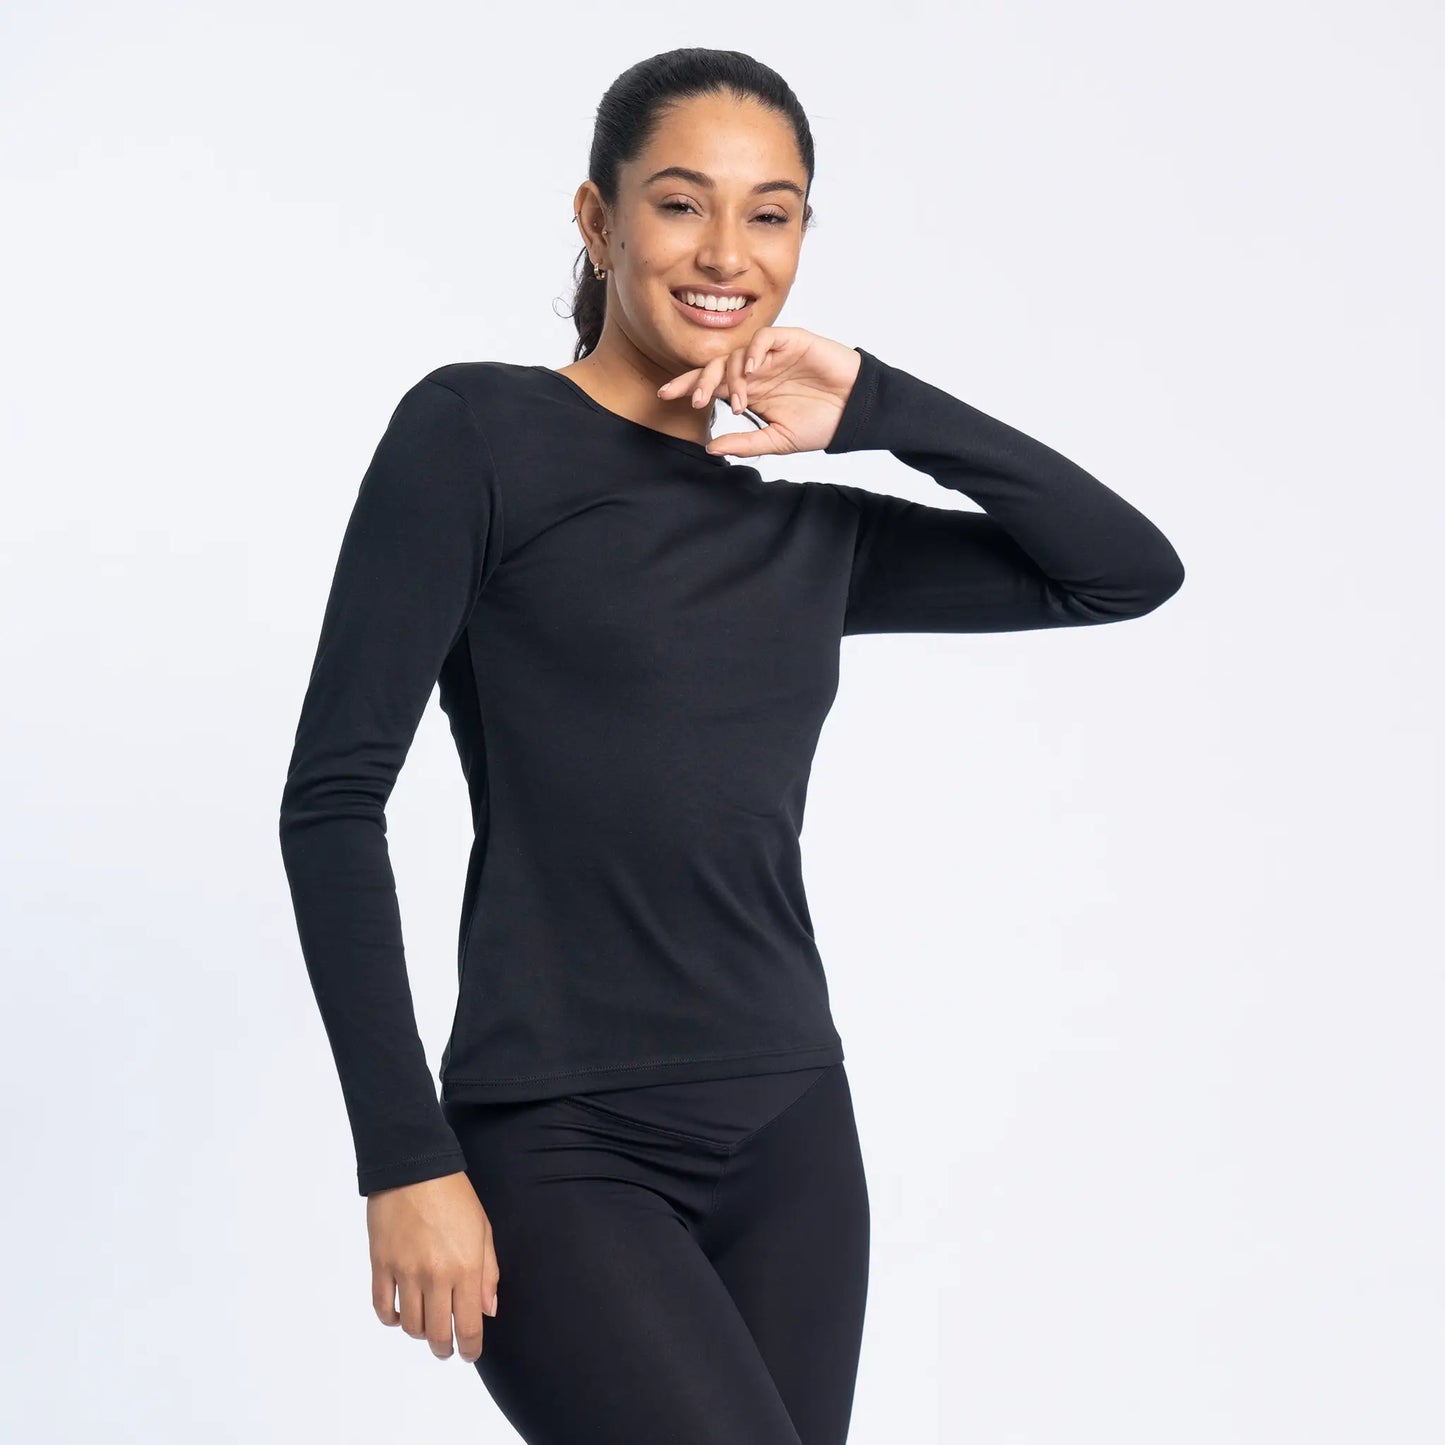 made with organic cotton, the most comfy long sleeve color black